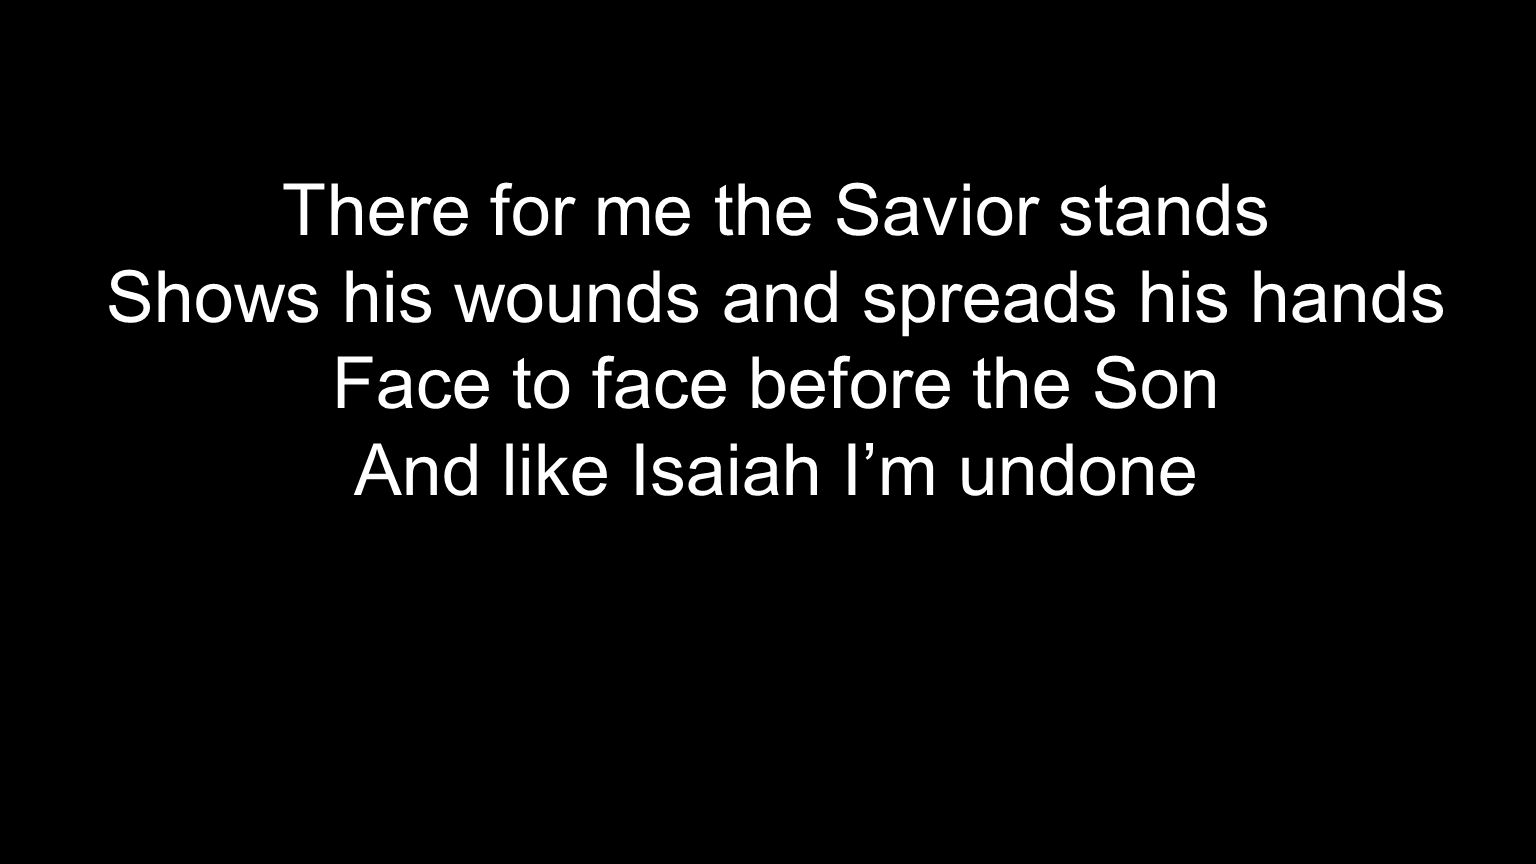 There for me the Savior stands Shows his wounds and spreads his hands Face to face before the Son And like Isaiah I’m undone